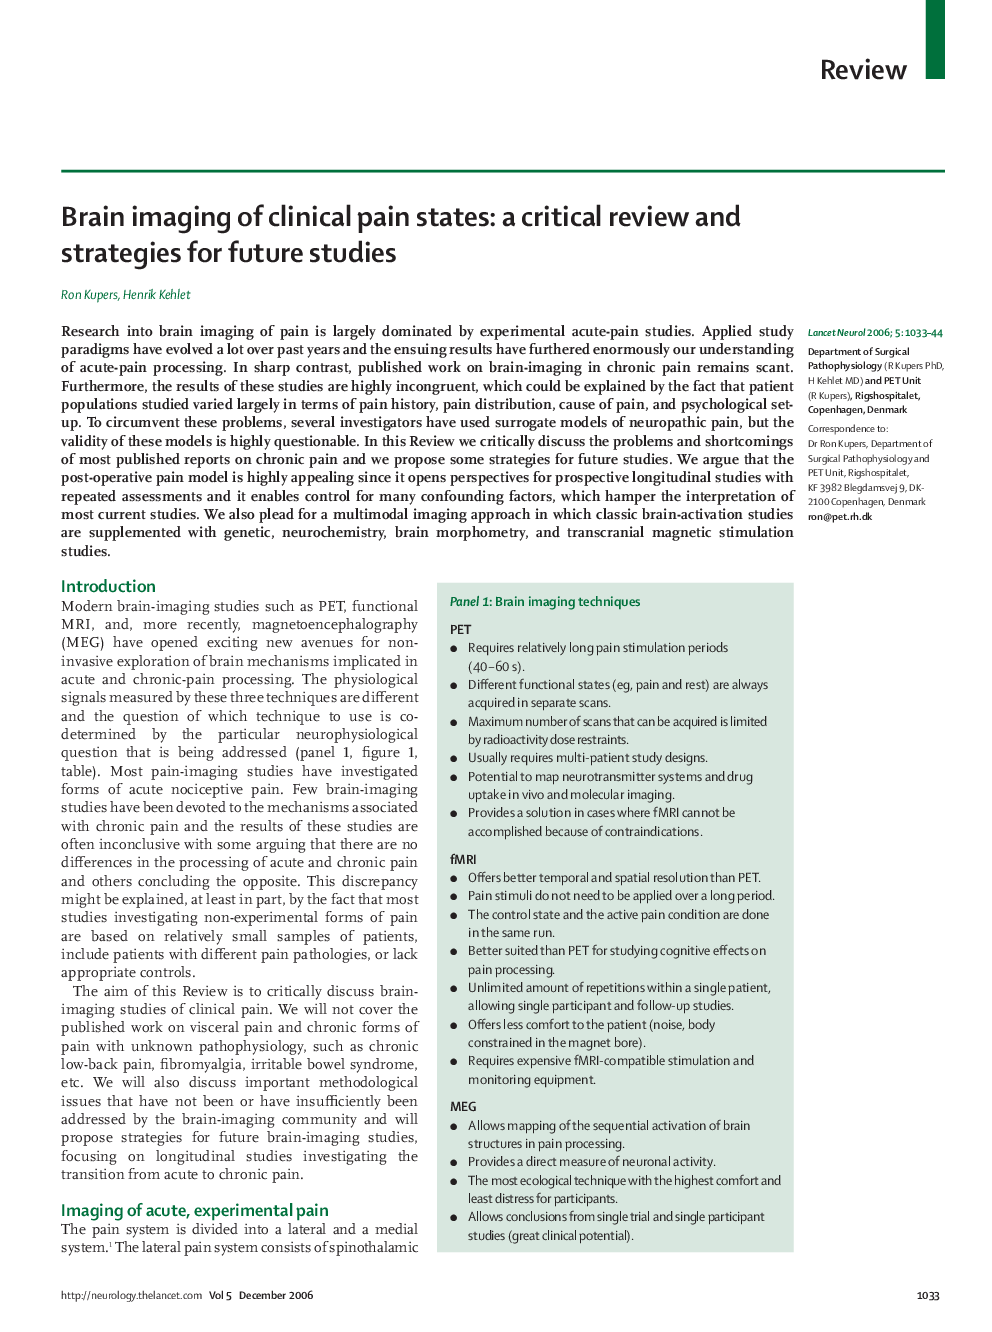 Brain imaging of clinical pain states: a critical review and strategies for future studies